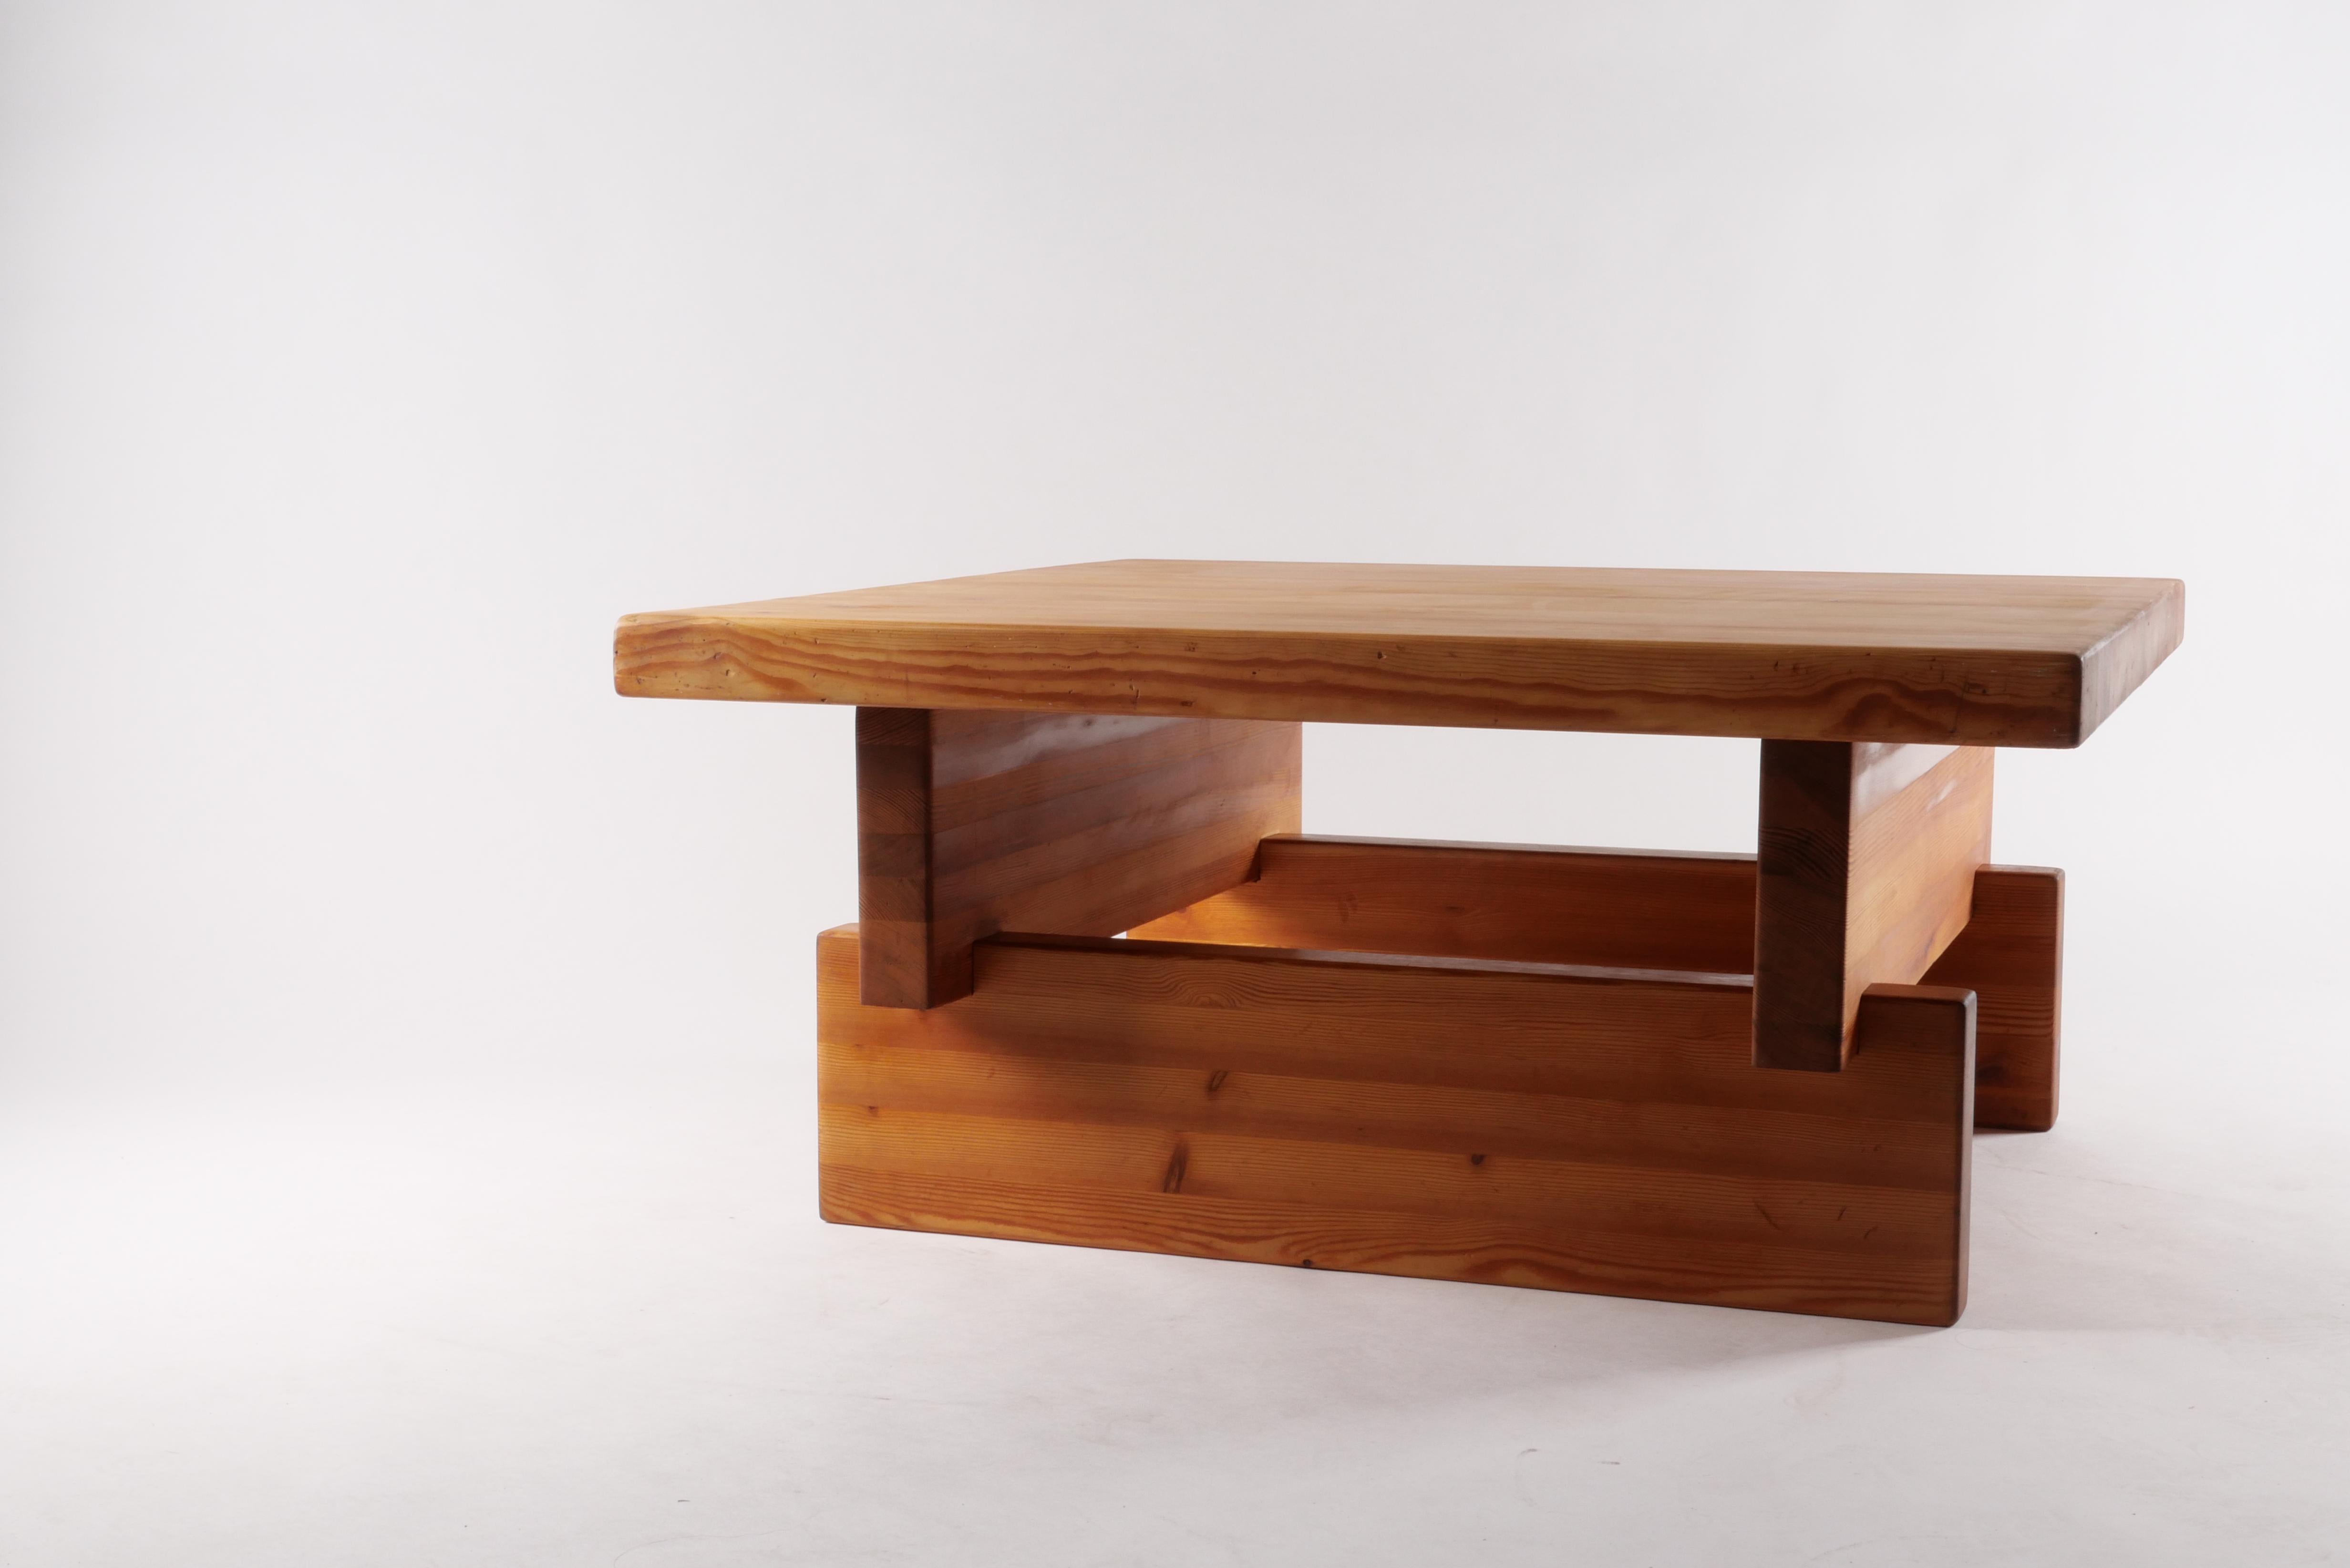 The table everyone wants! Solid Pine shapes each 2” thick are stacked to create an interlocking base structure. The substantial square top provides ample space to set a couple of drinks and a few stacks of art books. Put your feet up on it too! 